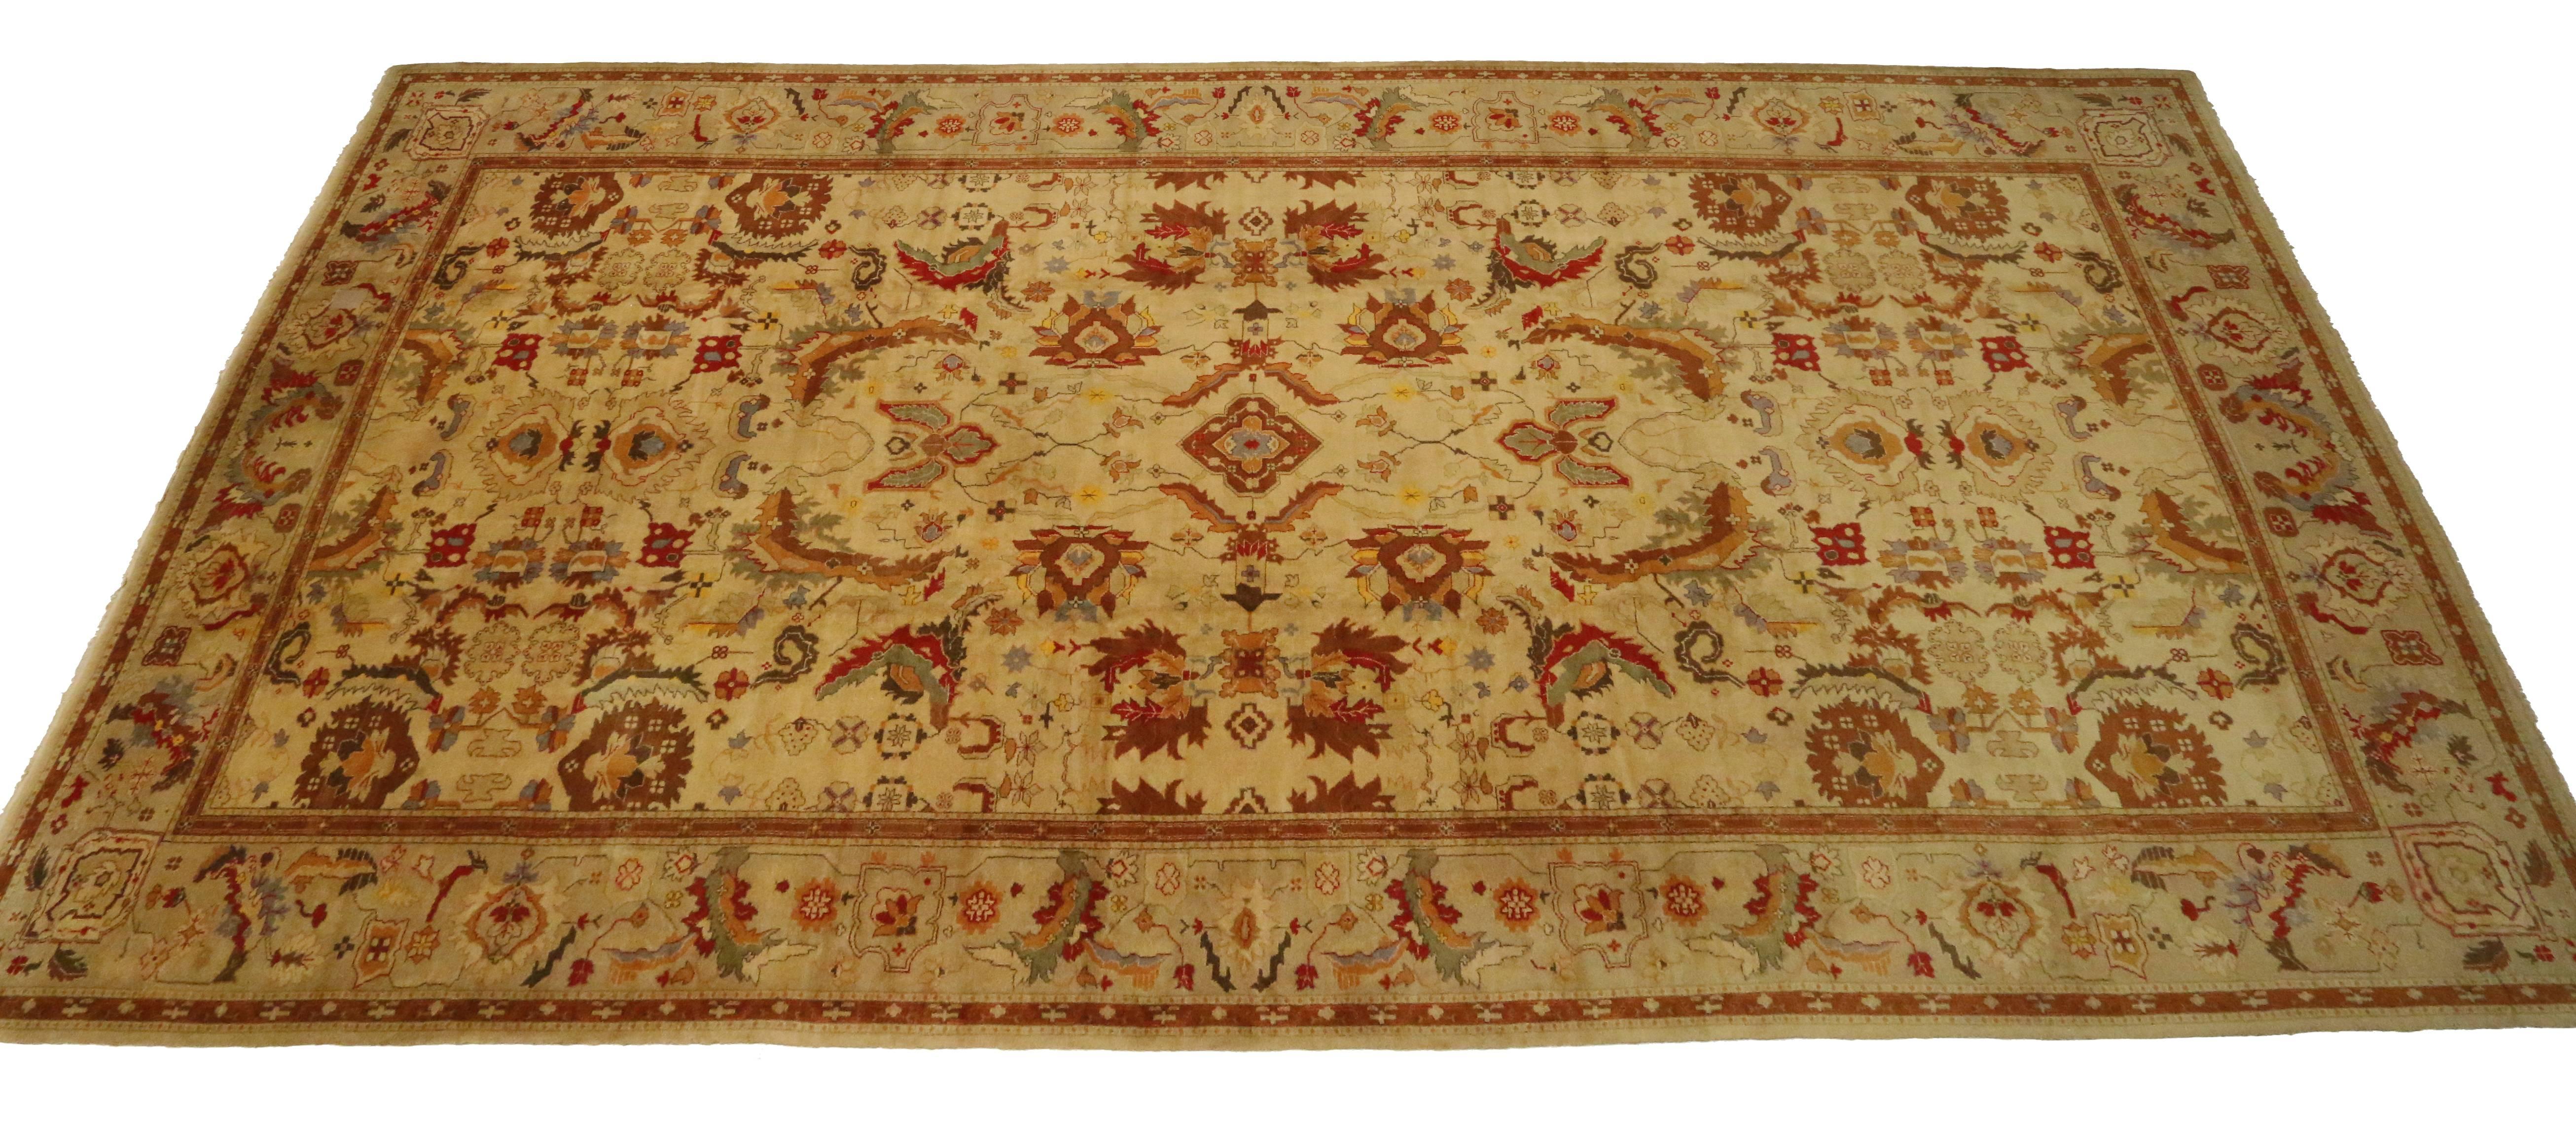 Hand-Knotted Oversized Vintage Portuguese Rug, Hotel Lobby Size Cuenca Carpet For Sale